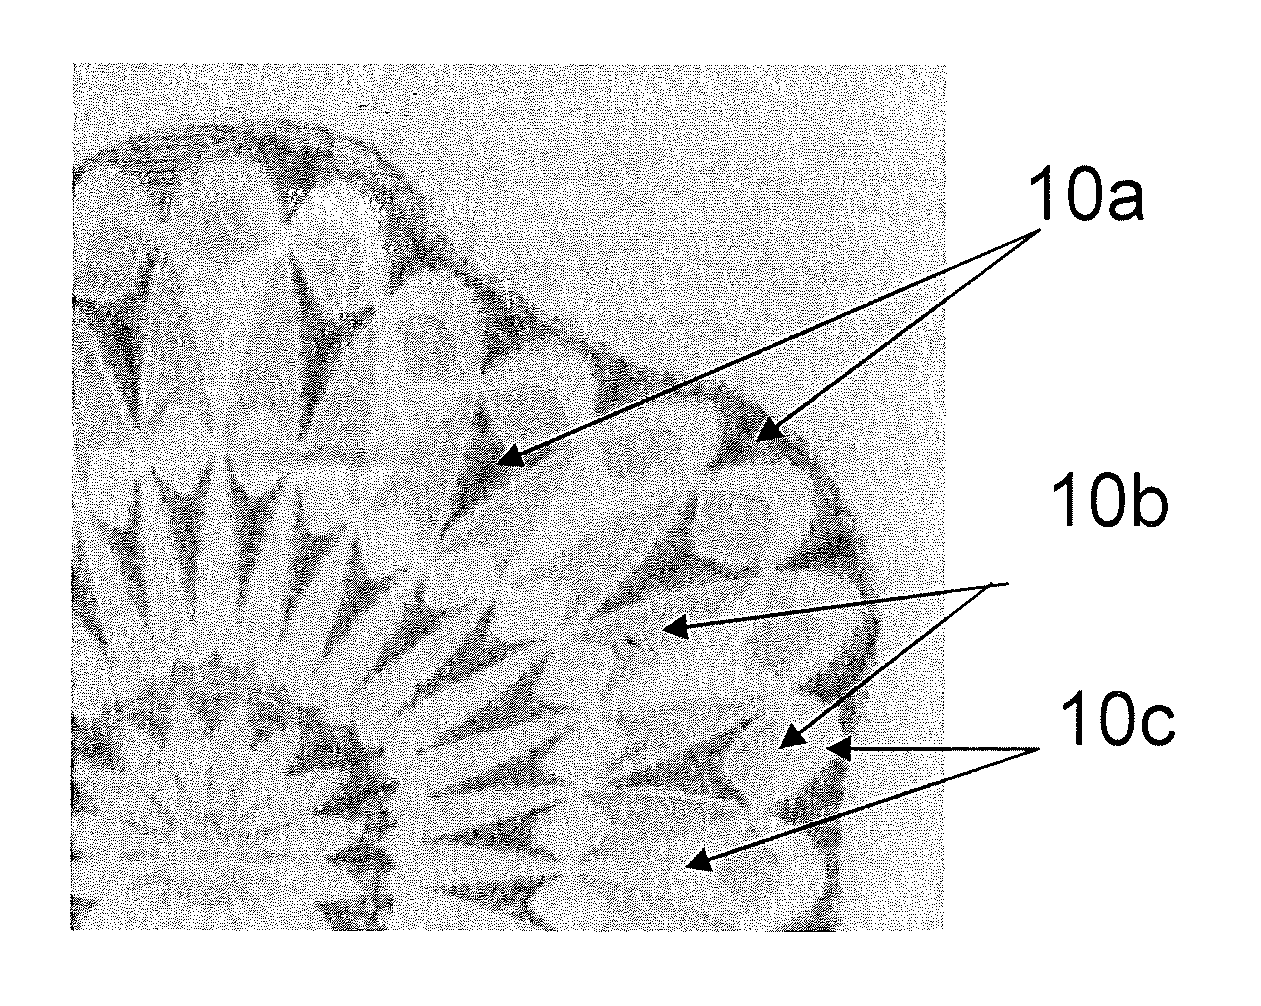 Method for printing multi-characteristic intaglio features